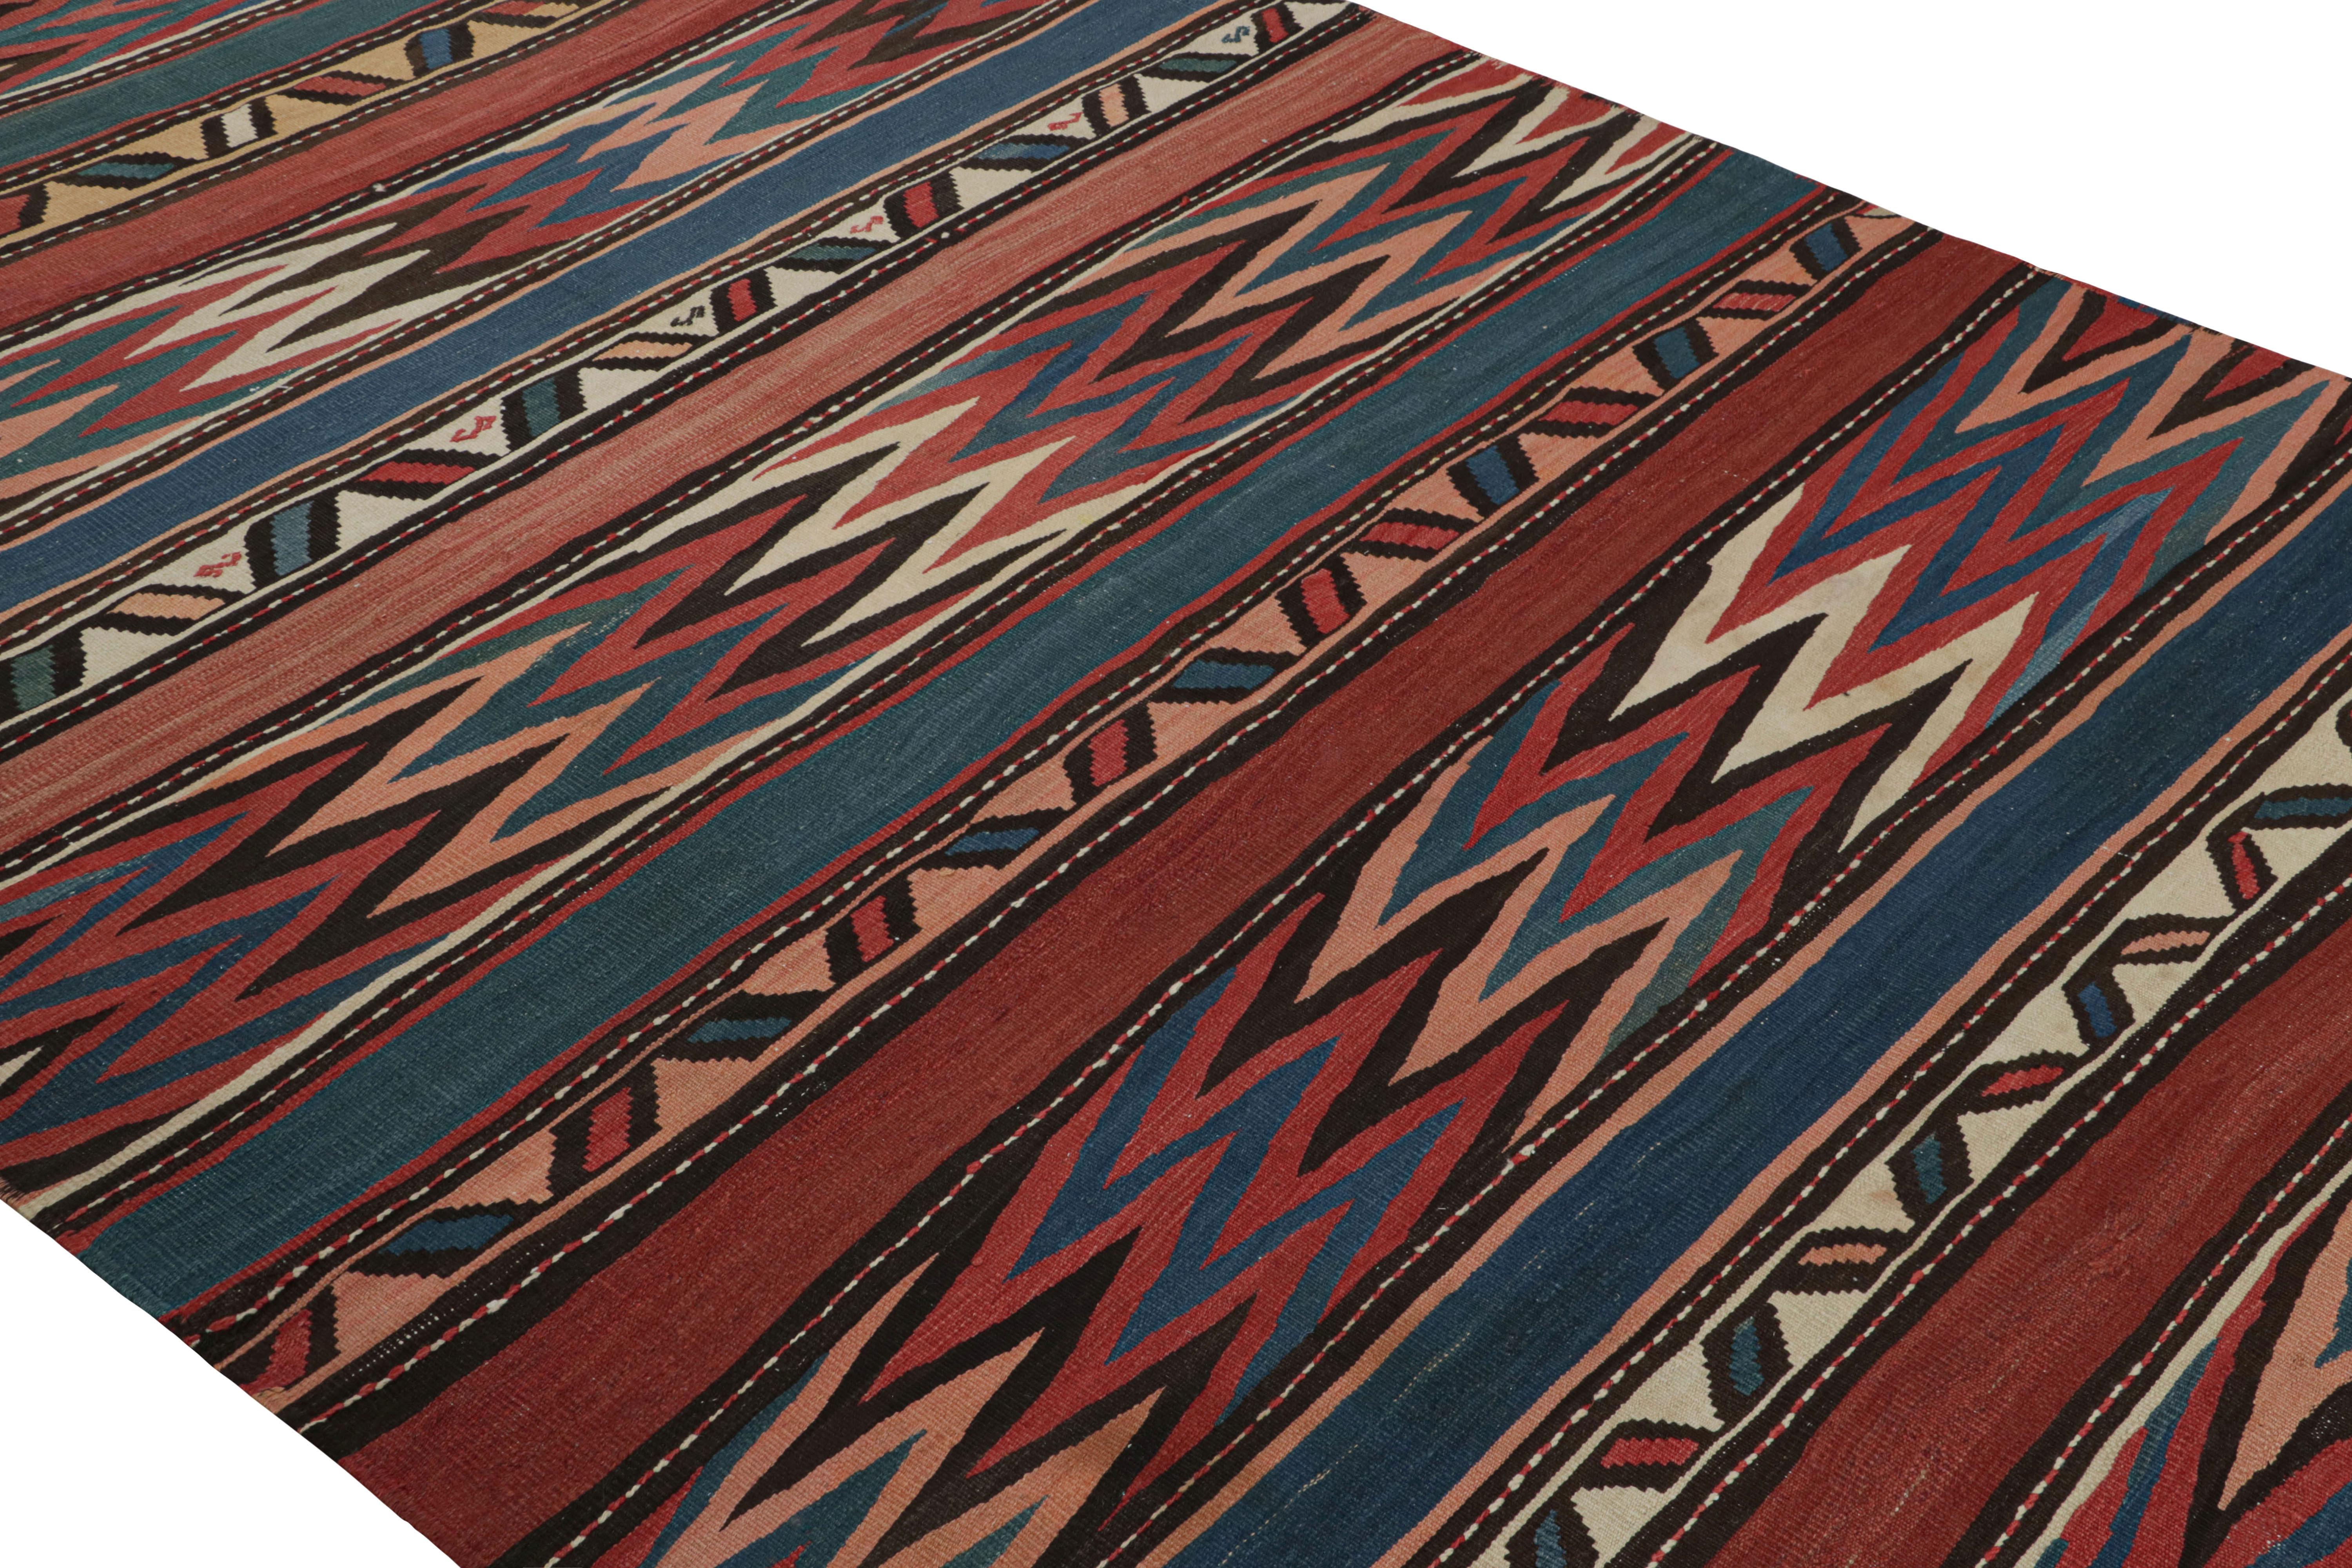 Handwoven between 1950-1960, this vintage midcentury 6 x 14 wool Kilim was discovered in Turkey, enjoying a Shahsavan Persian tribal design denoting a nomadic, diverse origin. The arresting colorway, including rich varied notes of crimson and